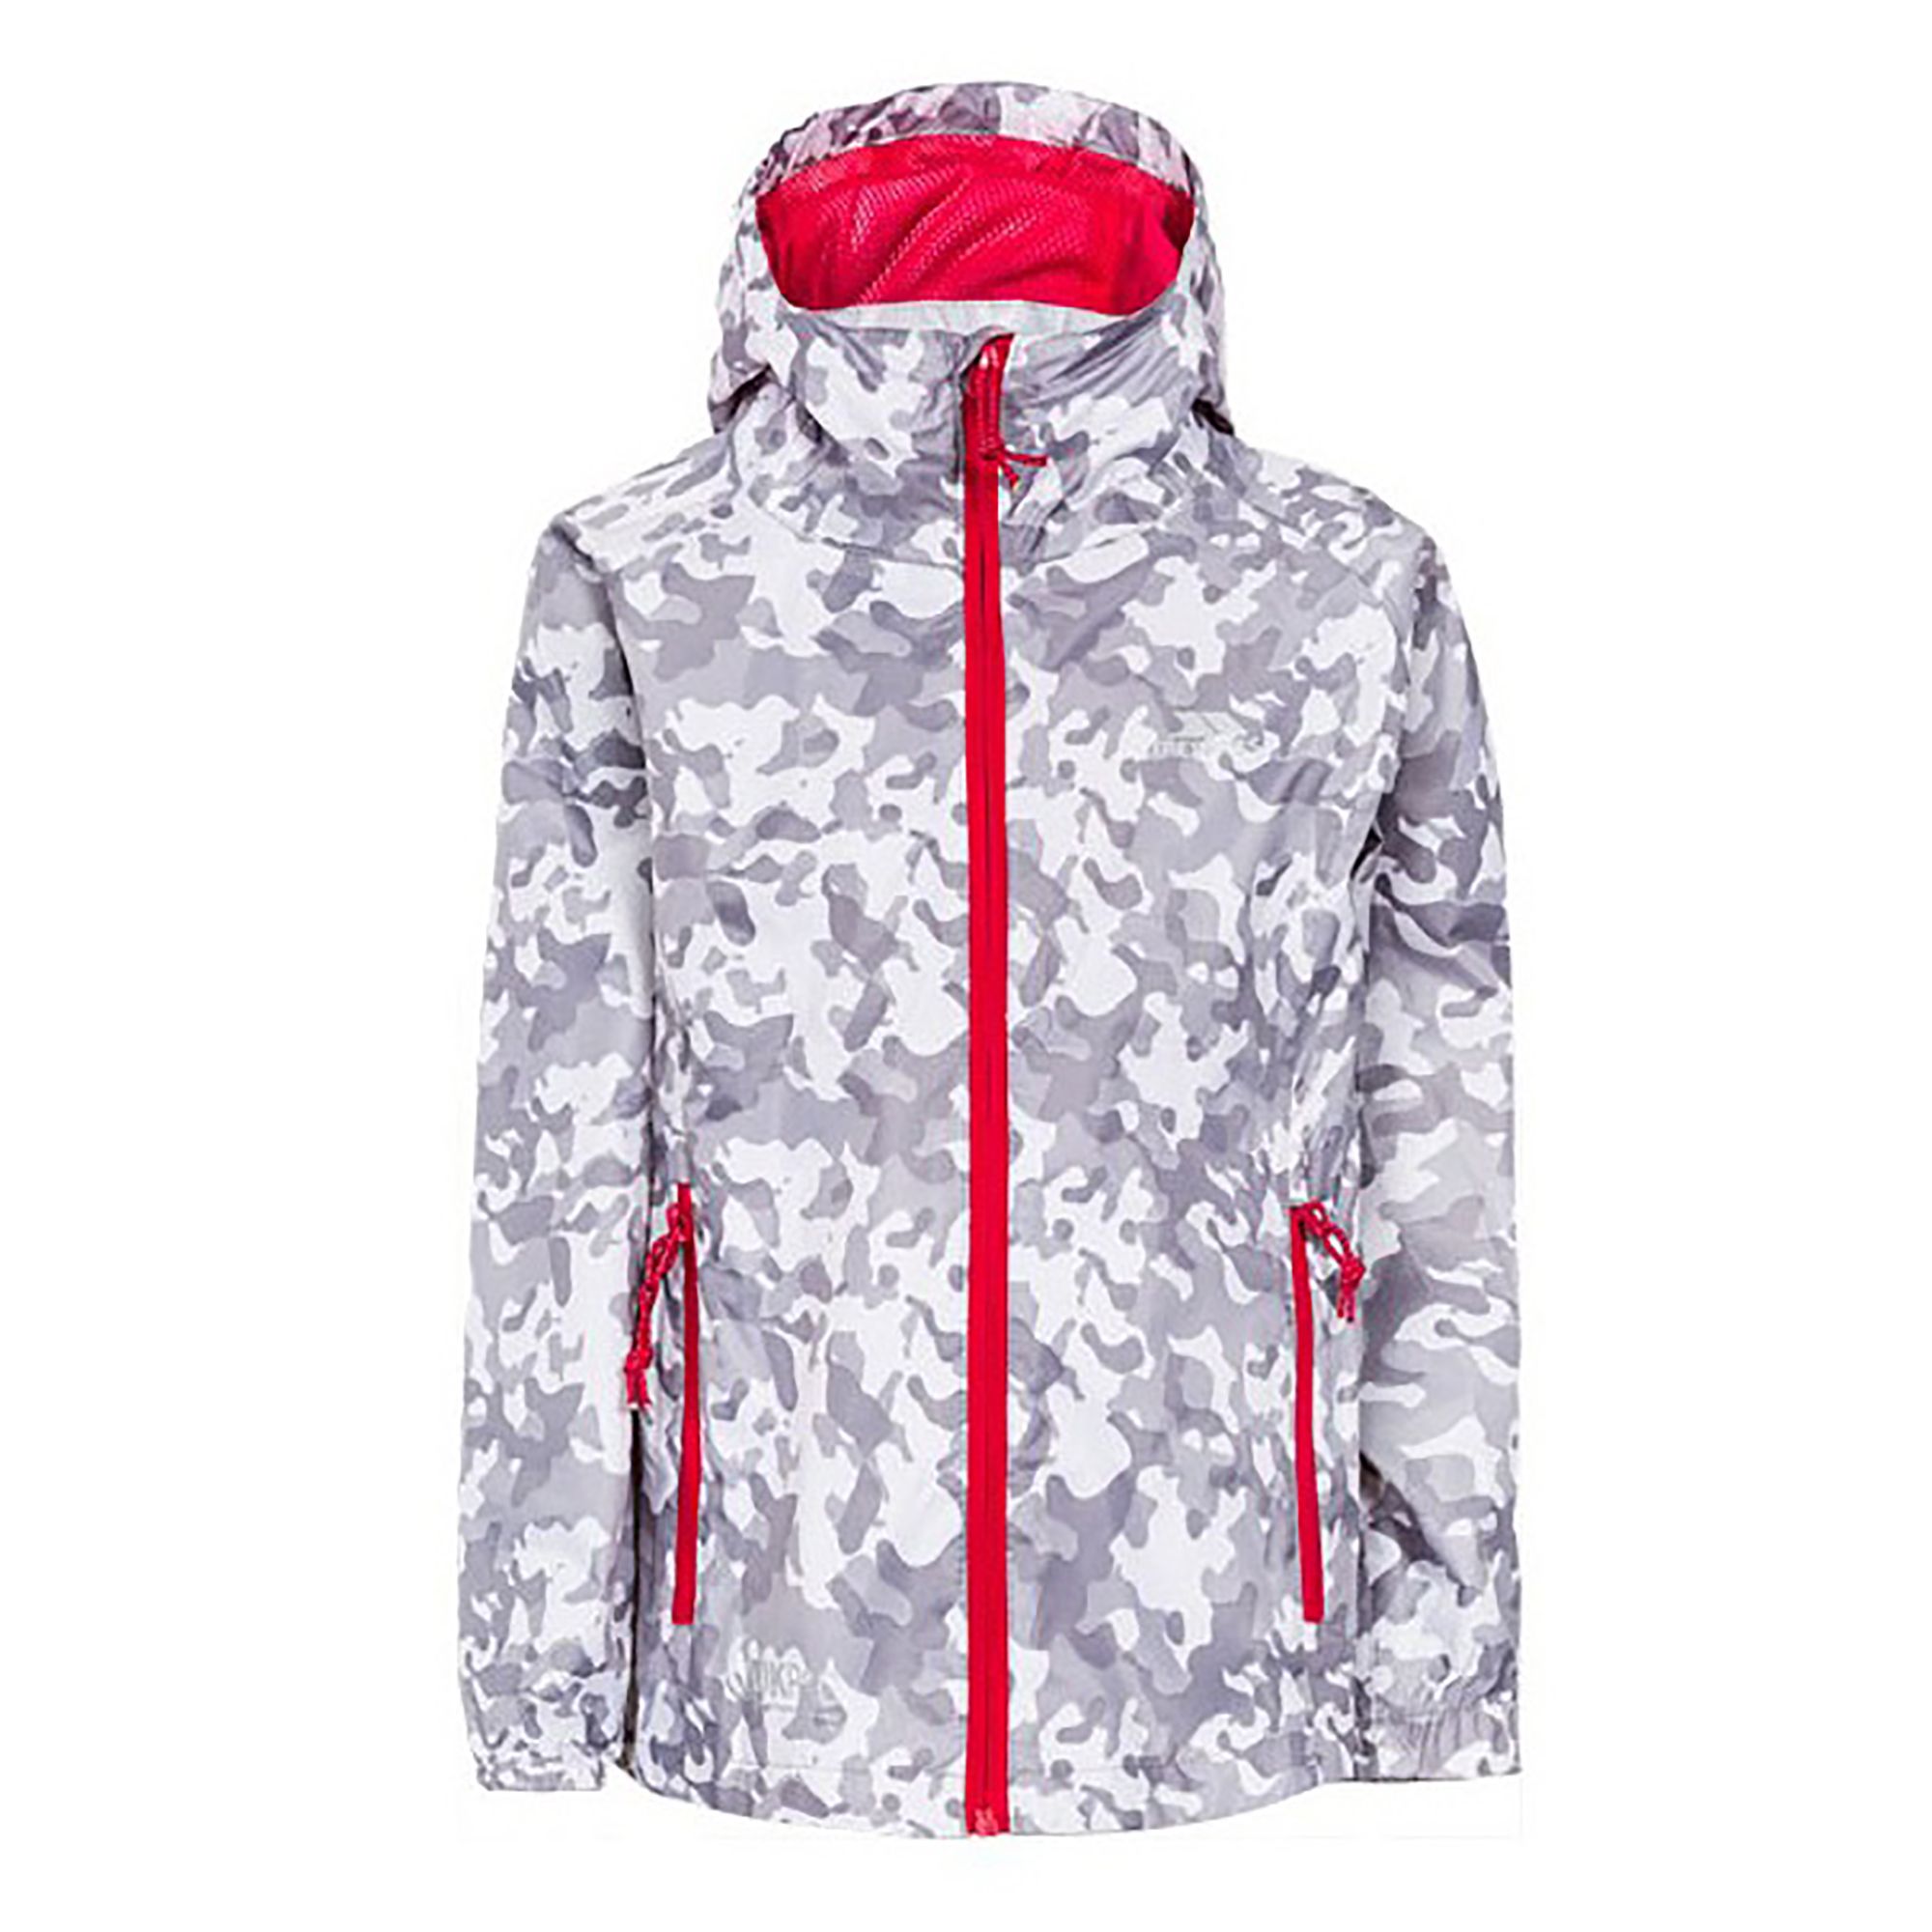 Unisex shell jacket. Adjustable grown on hood. 2 zip pockets. Full elasticated cuff. Full length internal front storm flap. Ventilated back yoke. Contrast low profile zips. Jacket packs into pouch. Waterproof 5000mm, breathable 5000mvp, windproof, taped seams. Shell: 100% Polyester PU coating, Mesh: 100% Polyester. Trespass Childrens Chest Sizing (approx): 2/3 Years - 21in/53cm, 3/4 Years - 22in/56cm, 5/6 Years - 24in/61cm, 7/8 Years - 26in/66cm, 9/10 Years - 28in/71cm, 11/12 Years - 31in/79cm.